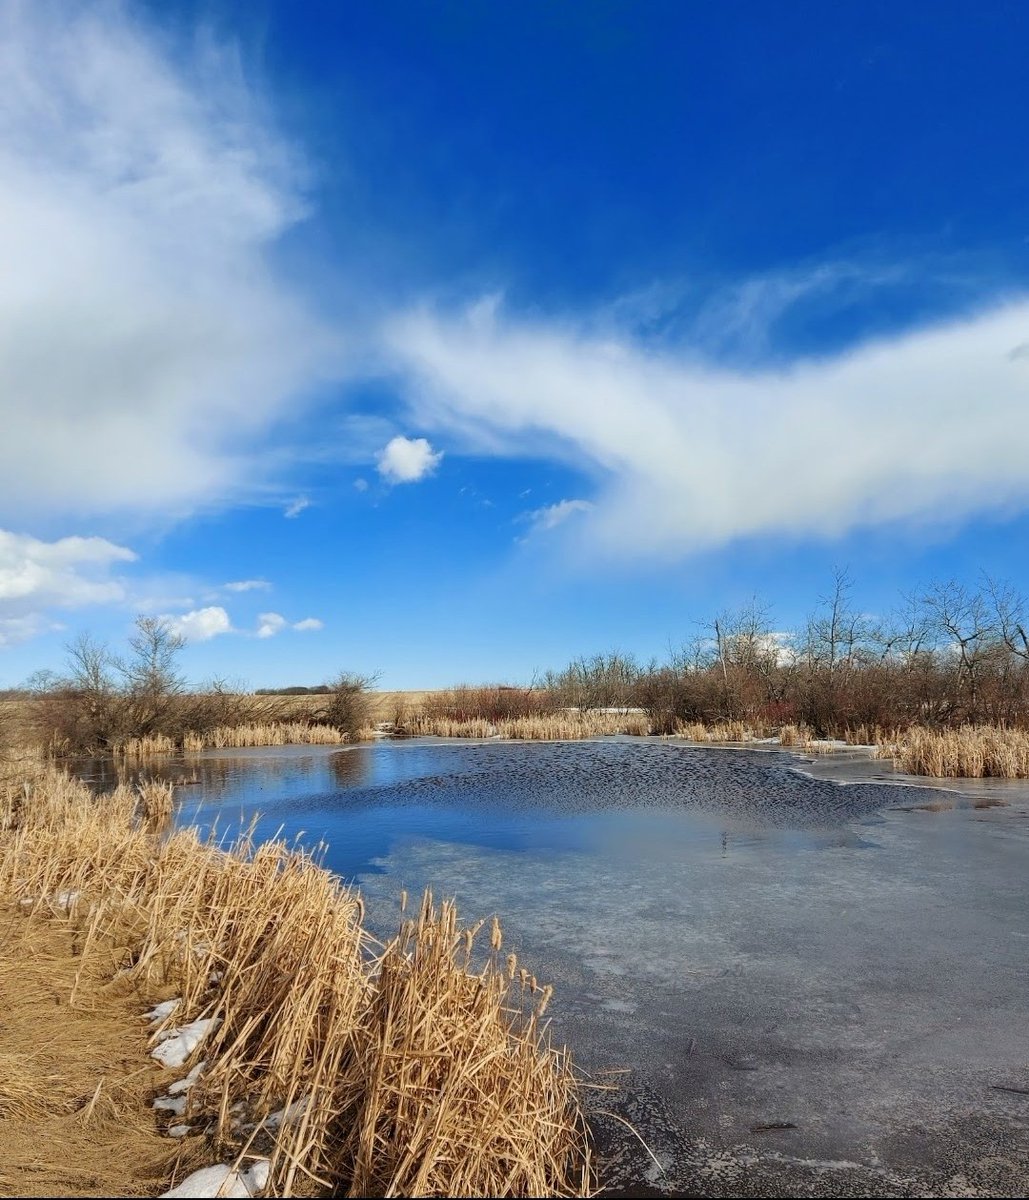 We all see something different in the clouds. I see a face on the left, blowing a heart kiss into the open mouth of a serpent. 
Have a great week 😀 
#photography #photooftheday #faceinthecloud 
#springthaw 
#Alberta 
#Wetlands 
#conservation 
#melting